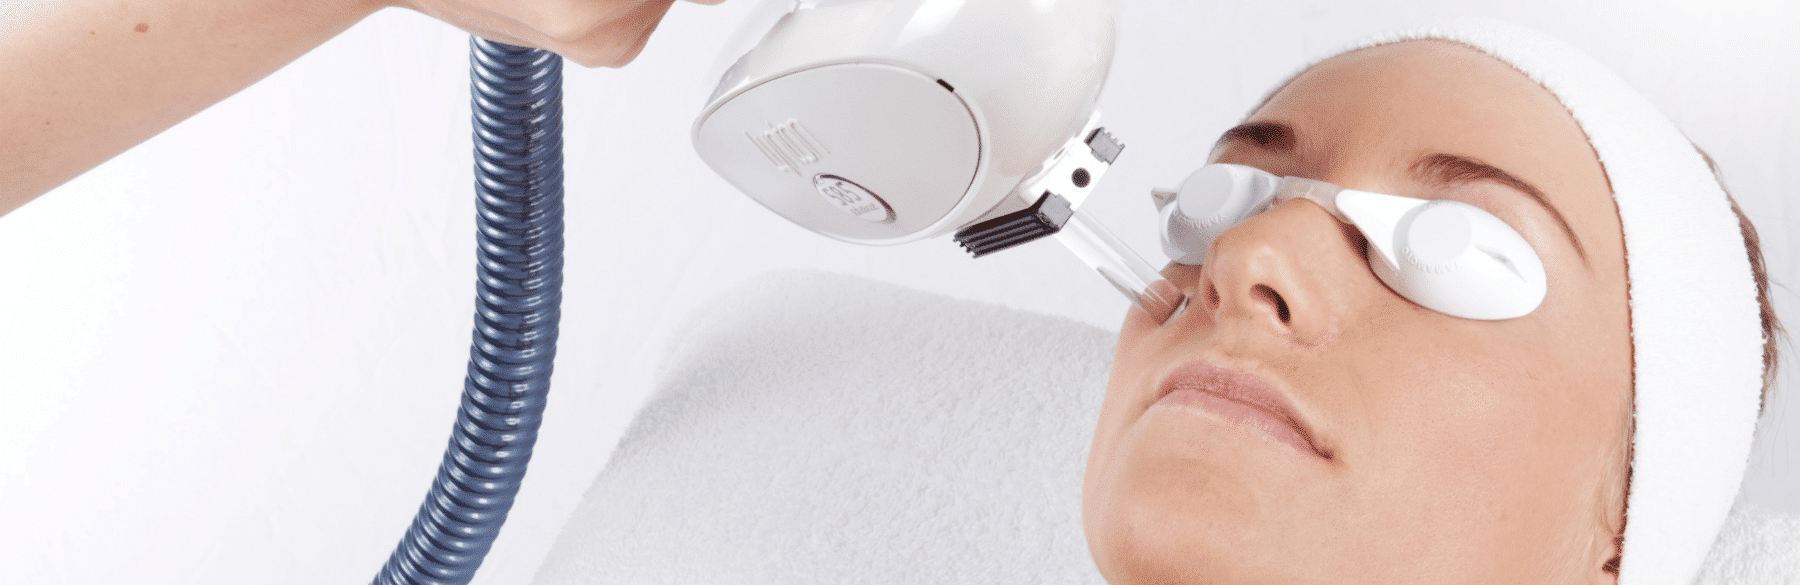 Aesthetics Skin Treatments at The Spa therapy Room